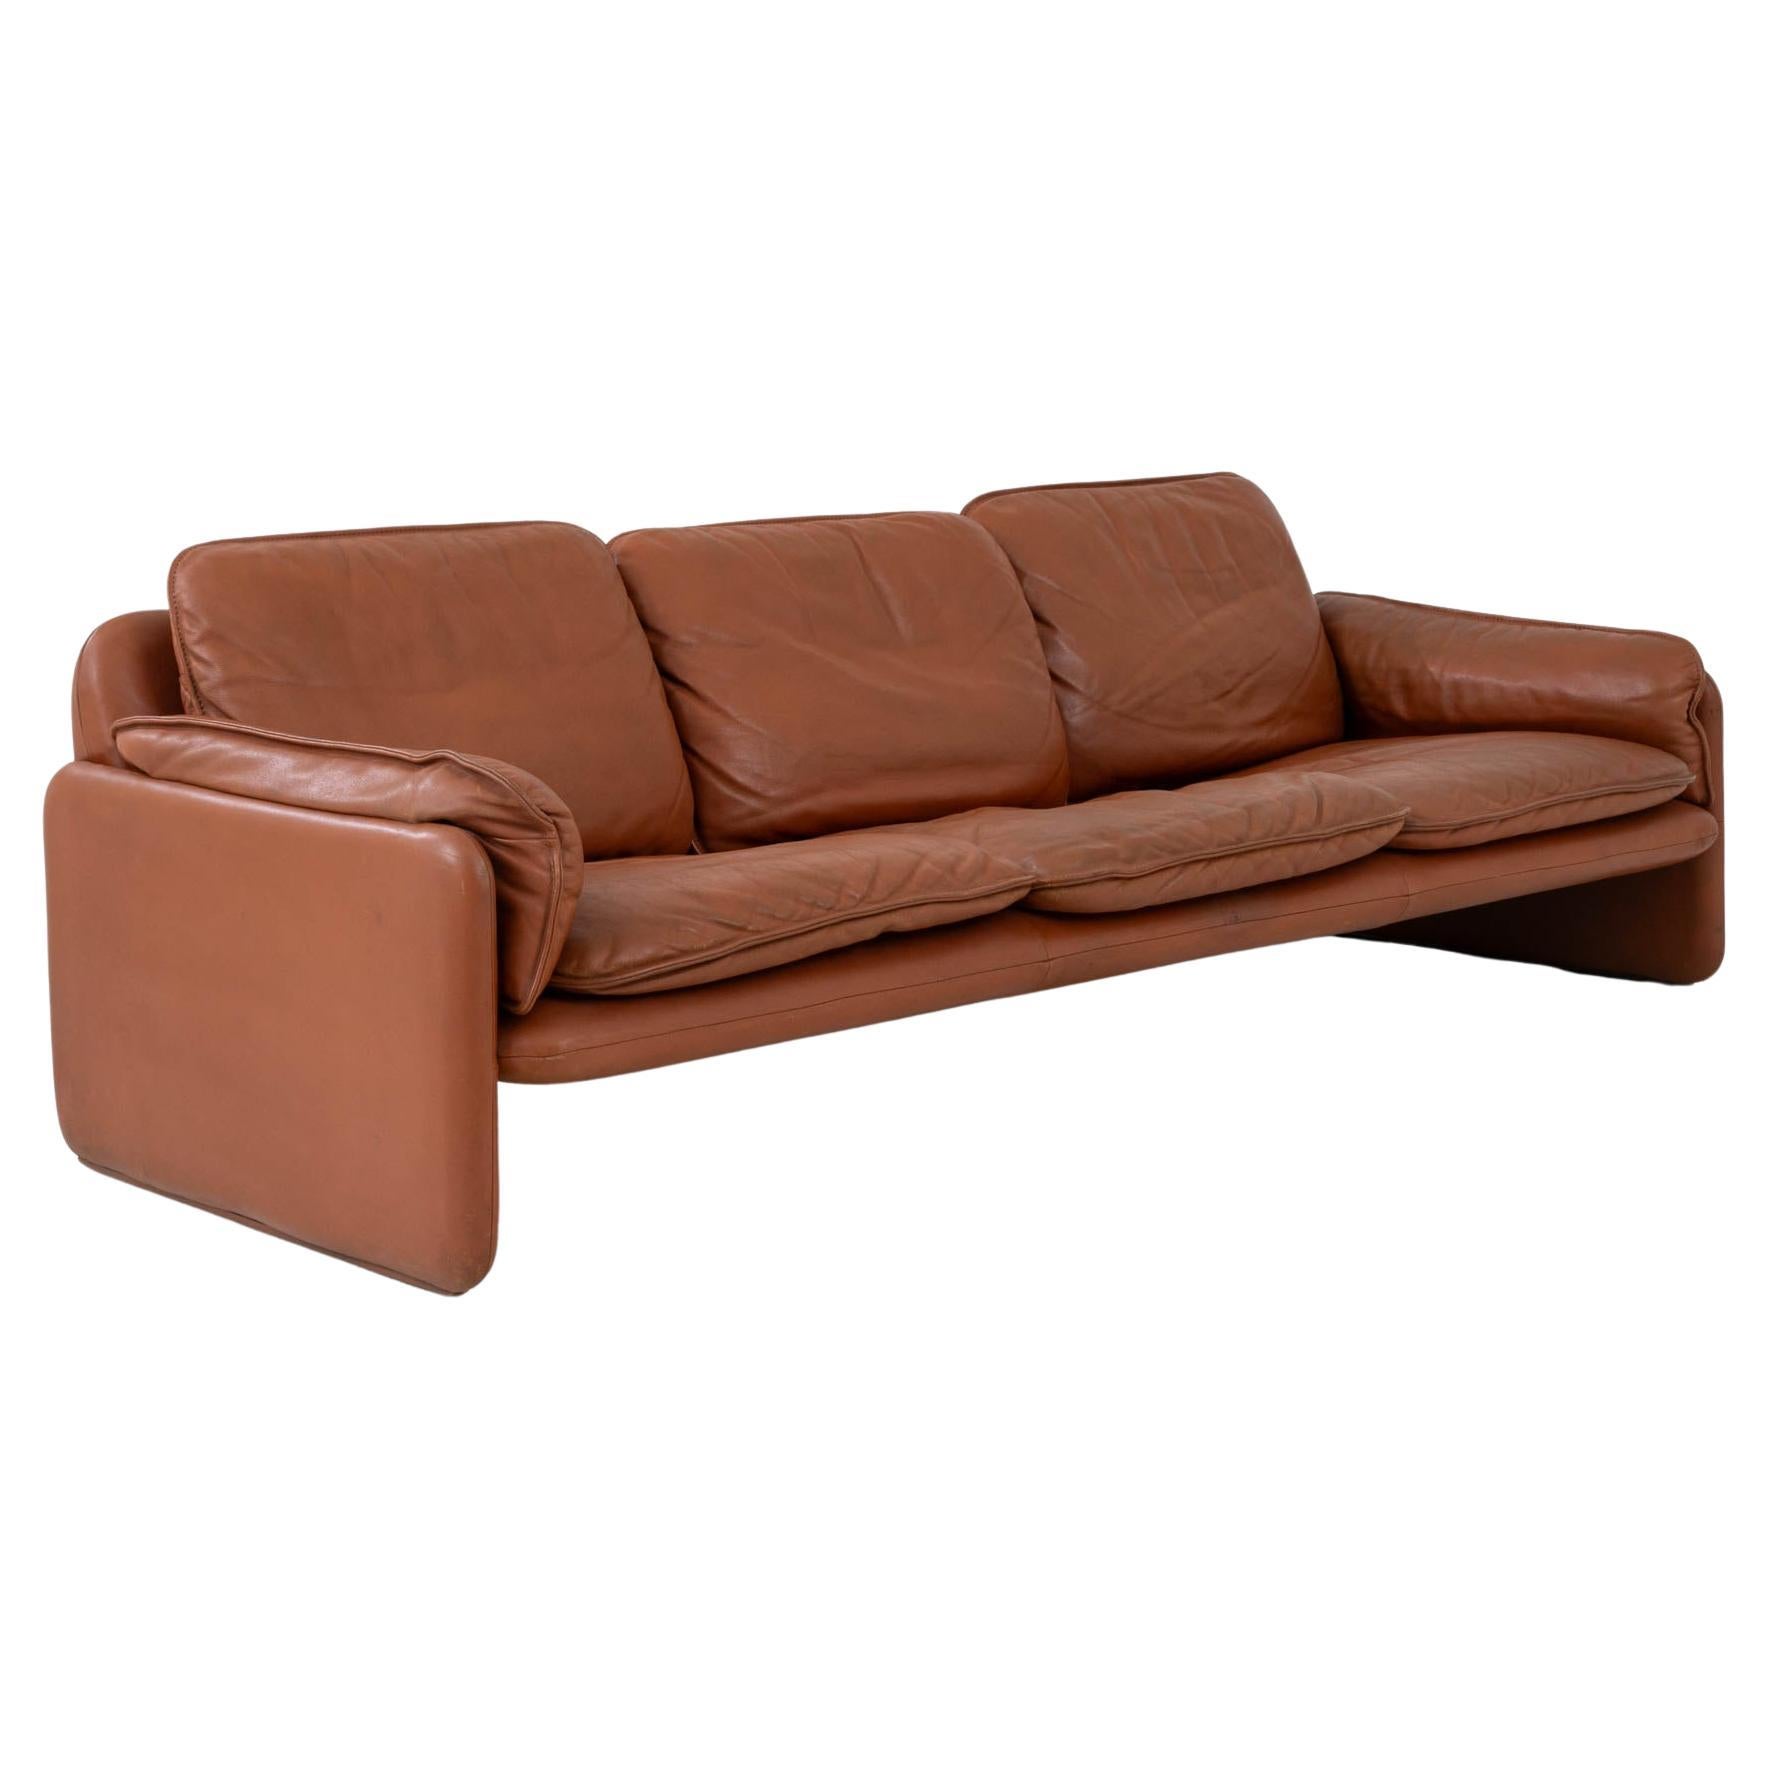 1970s Swiss Leather Sofa DS61 By De Sede